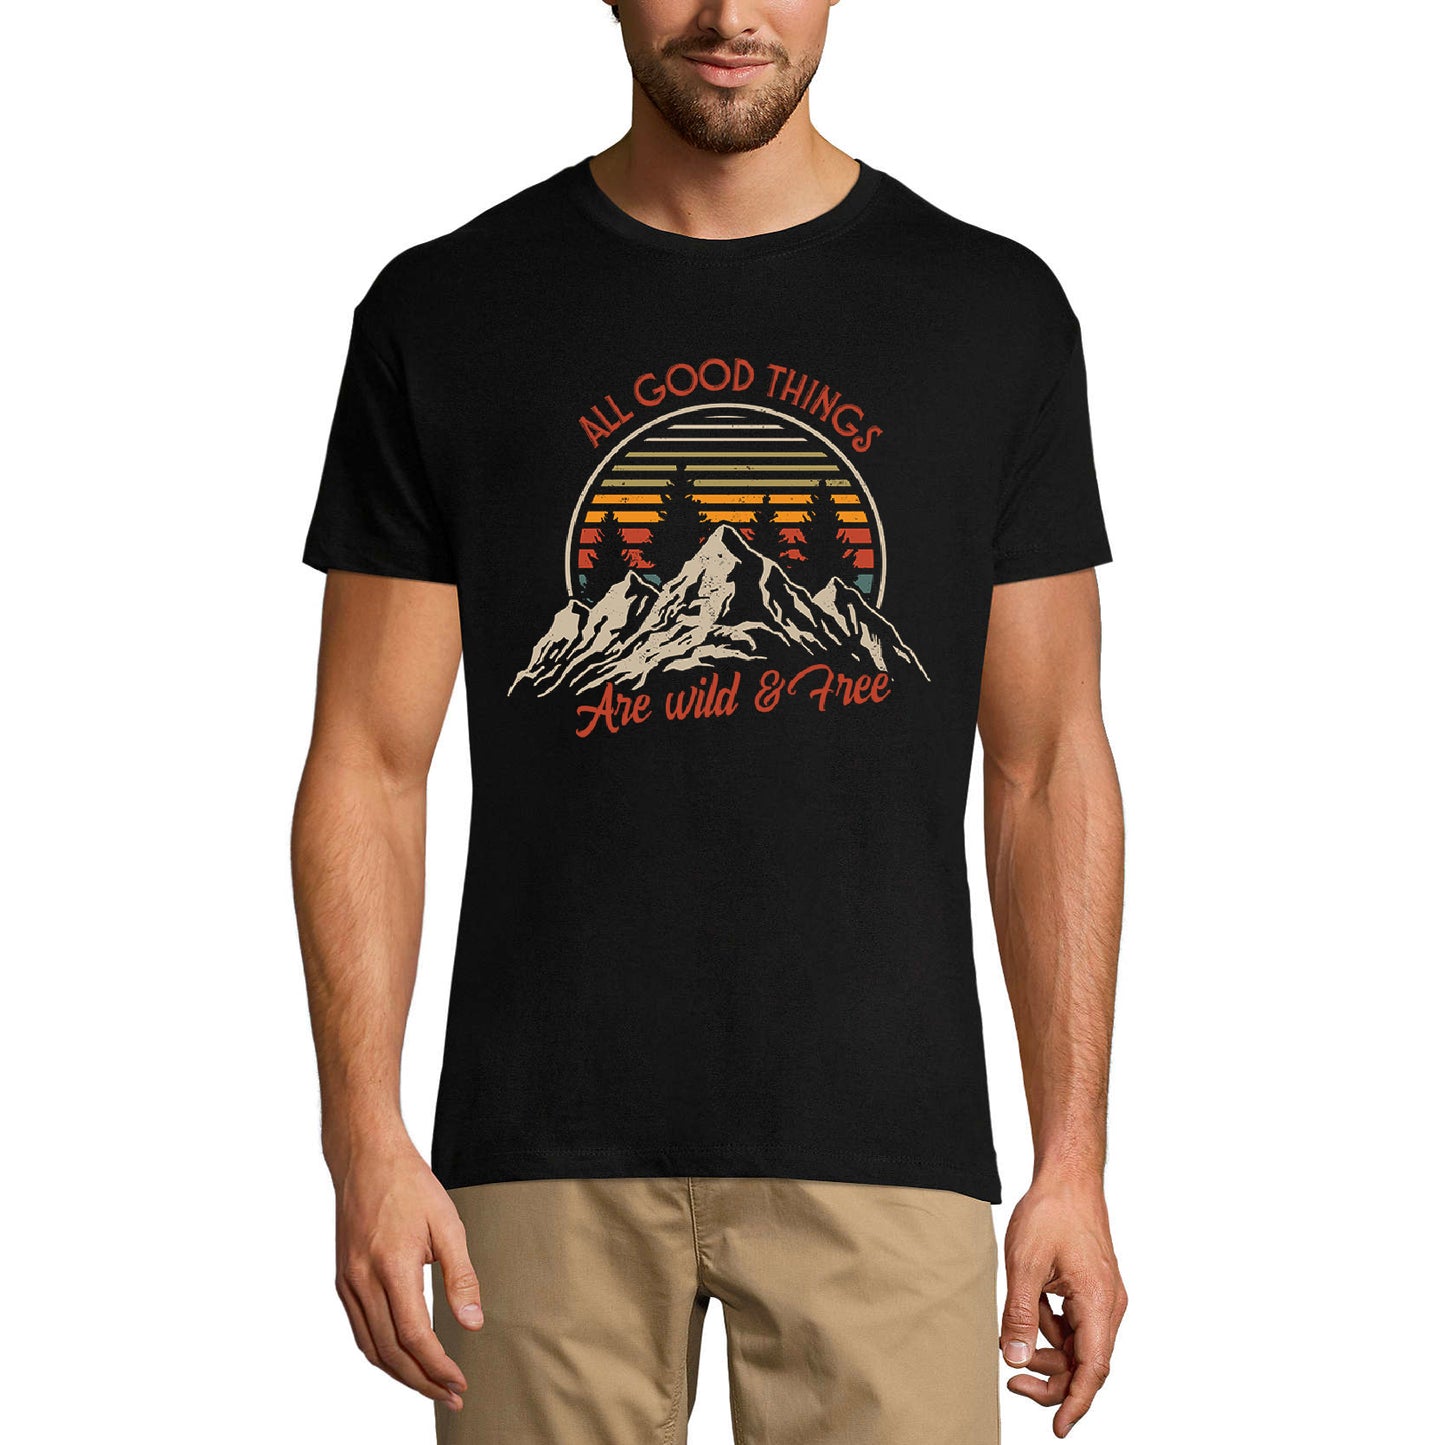 ULTRABASIC Men's T-Shirt All Good Things are Wild and Free - Mountain Hiking Tee Shirt